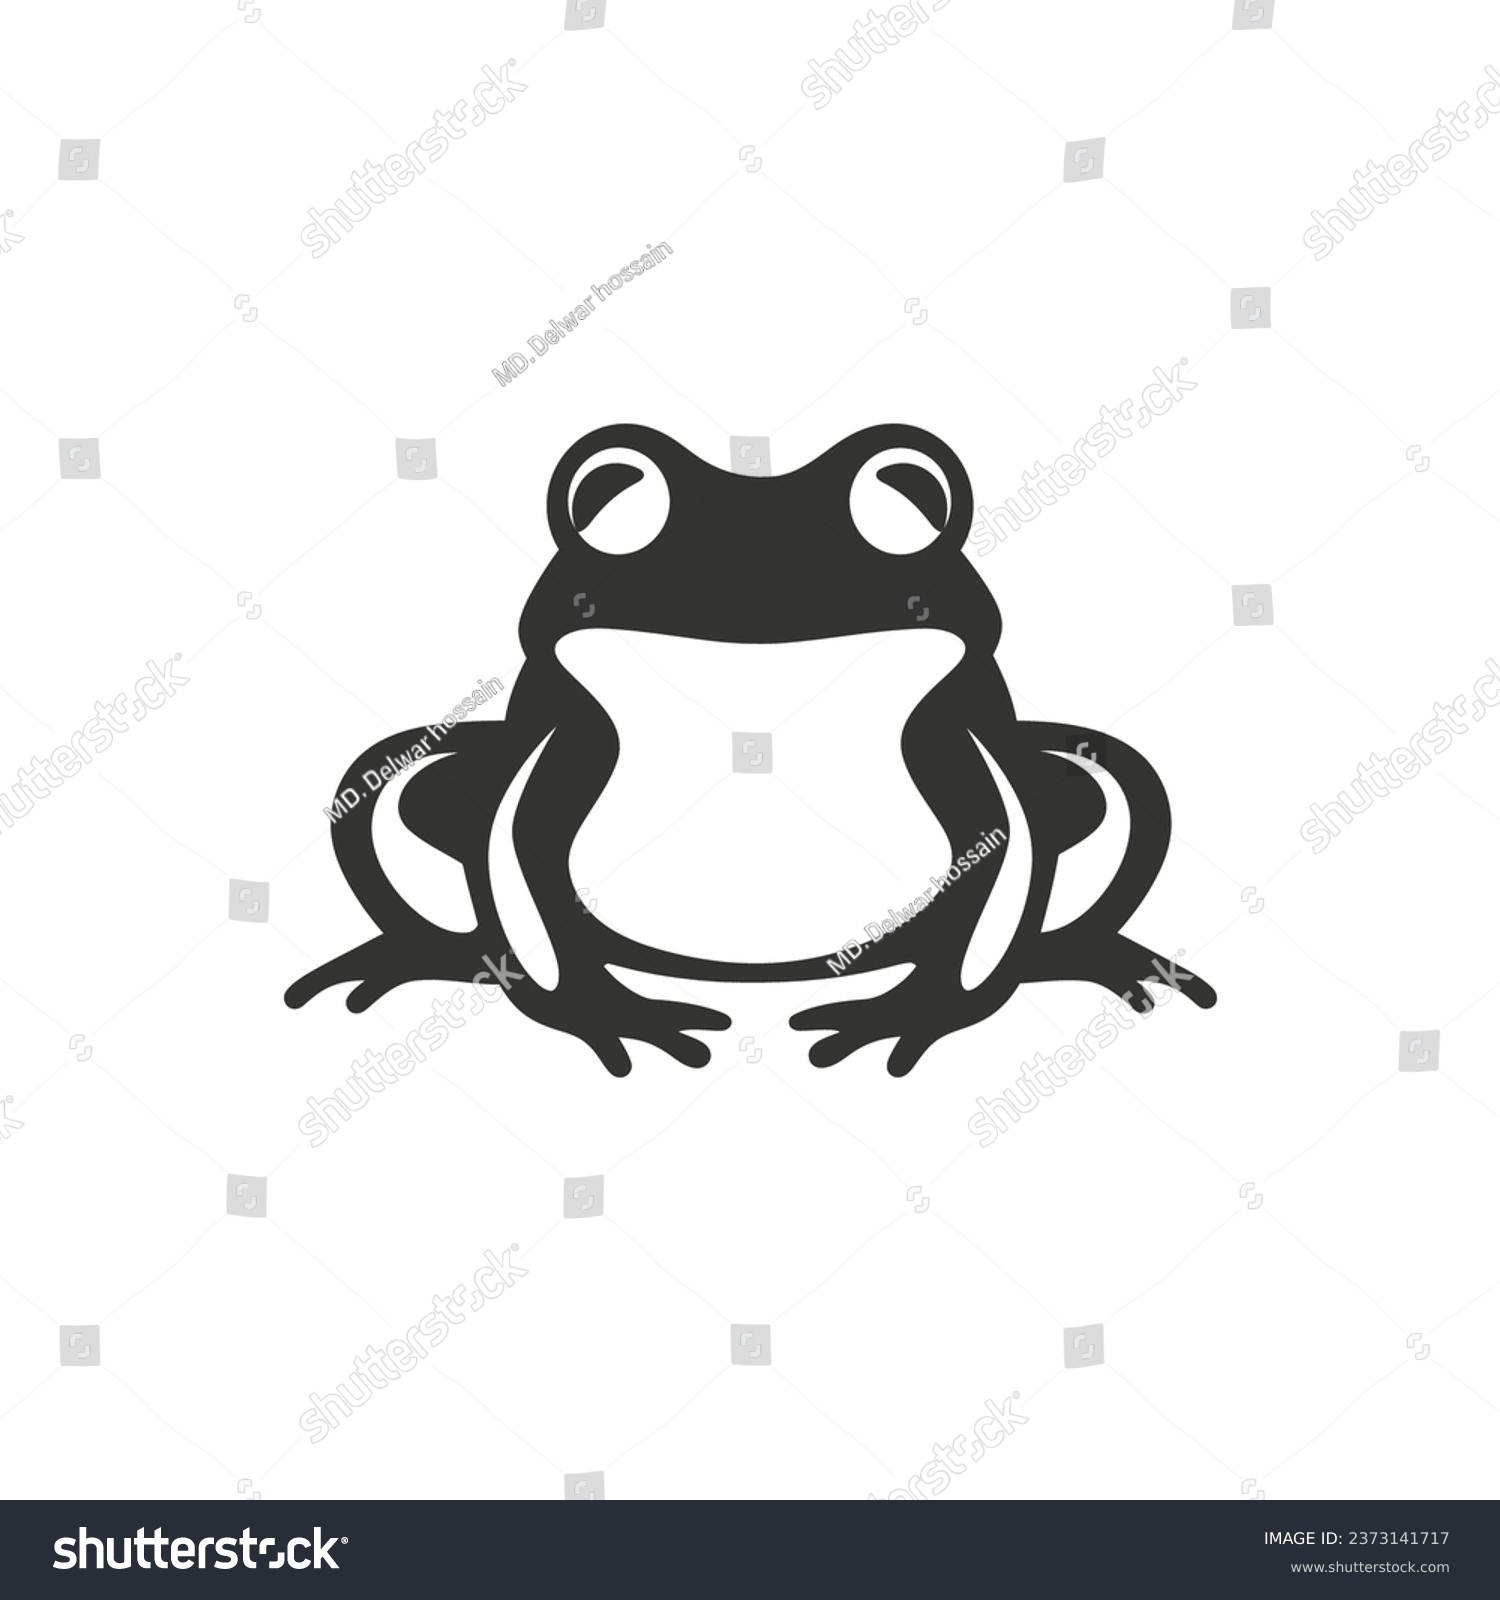 SVG of Frog Icon on White Background - Simple Vector Illustration svg